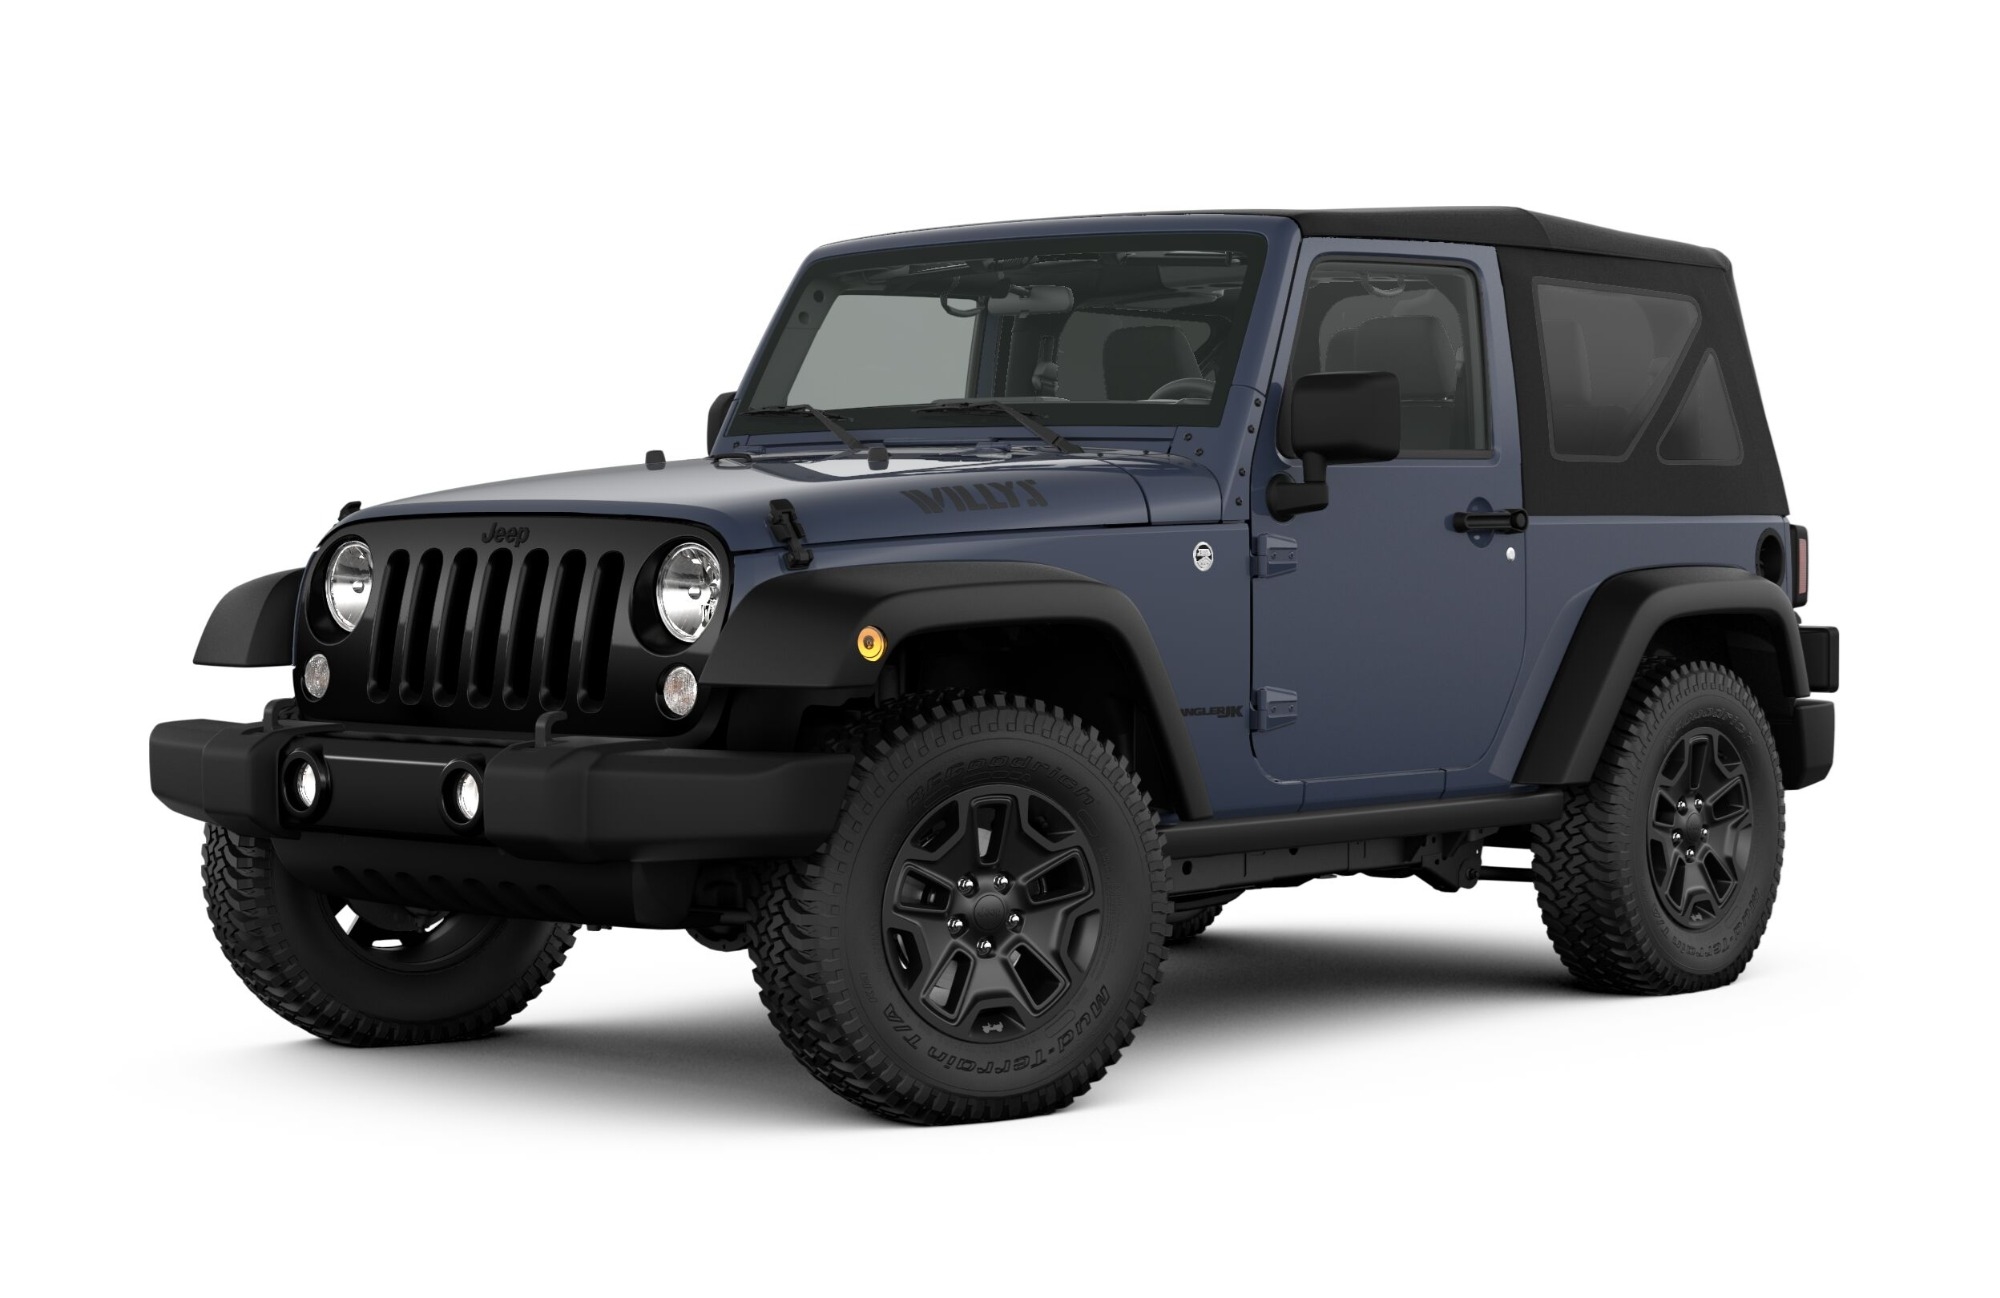 2018 Jeep Wrangler JK Willys Wheeler Full Specs, Features and Price |  CarBuzz